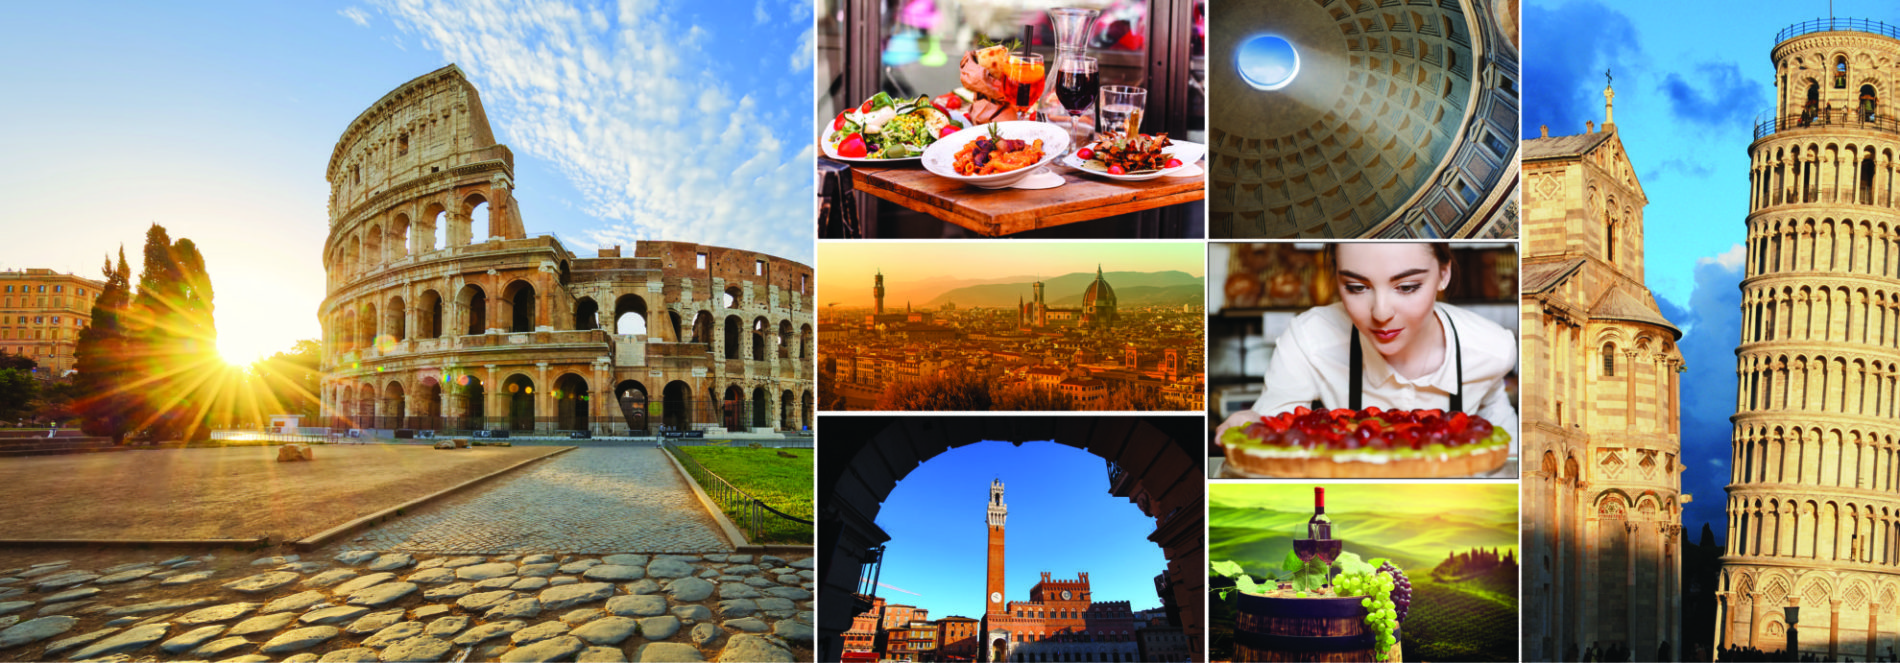 Experience Italy Tour